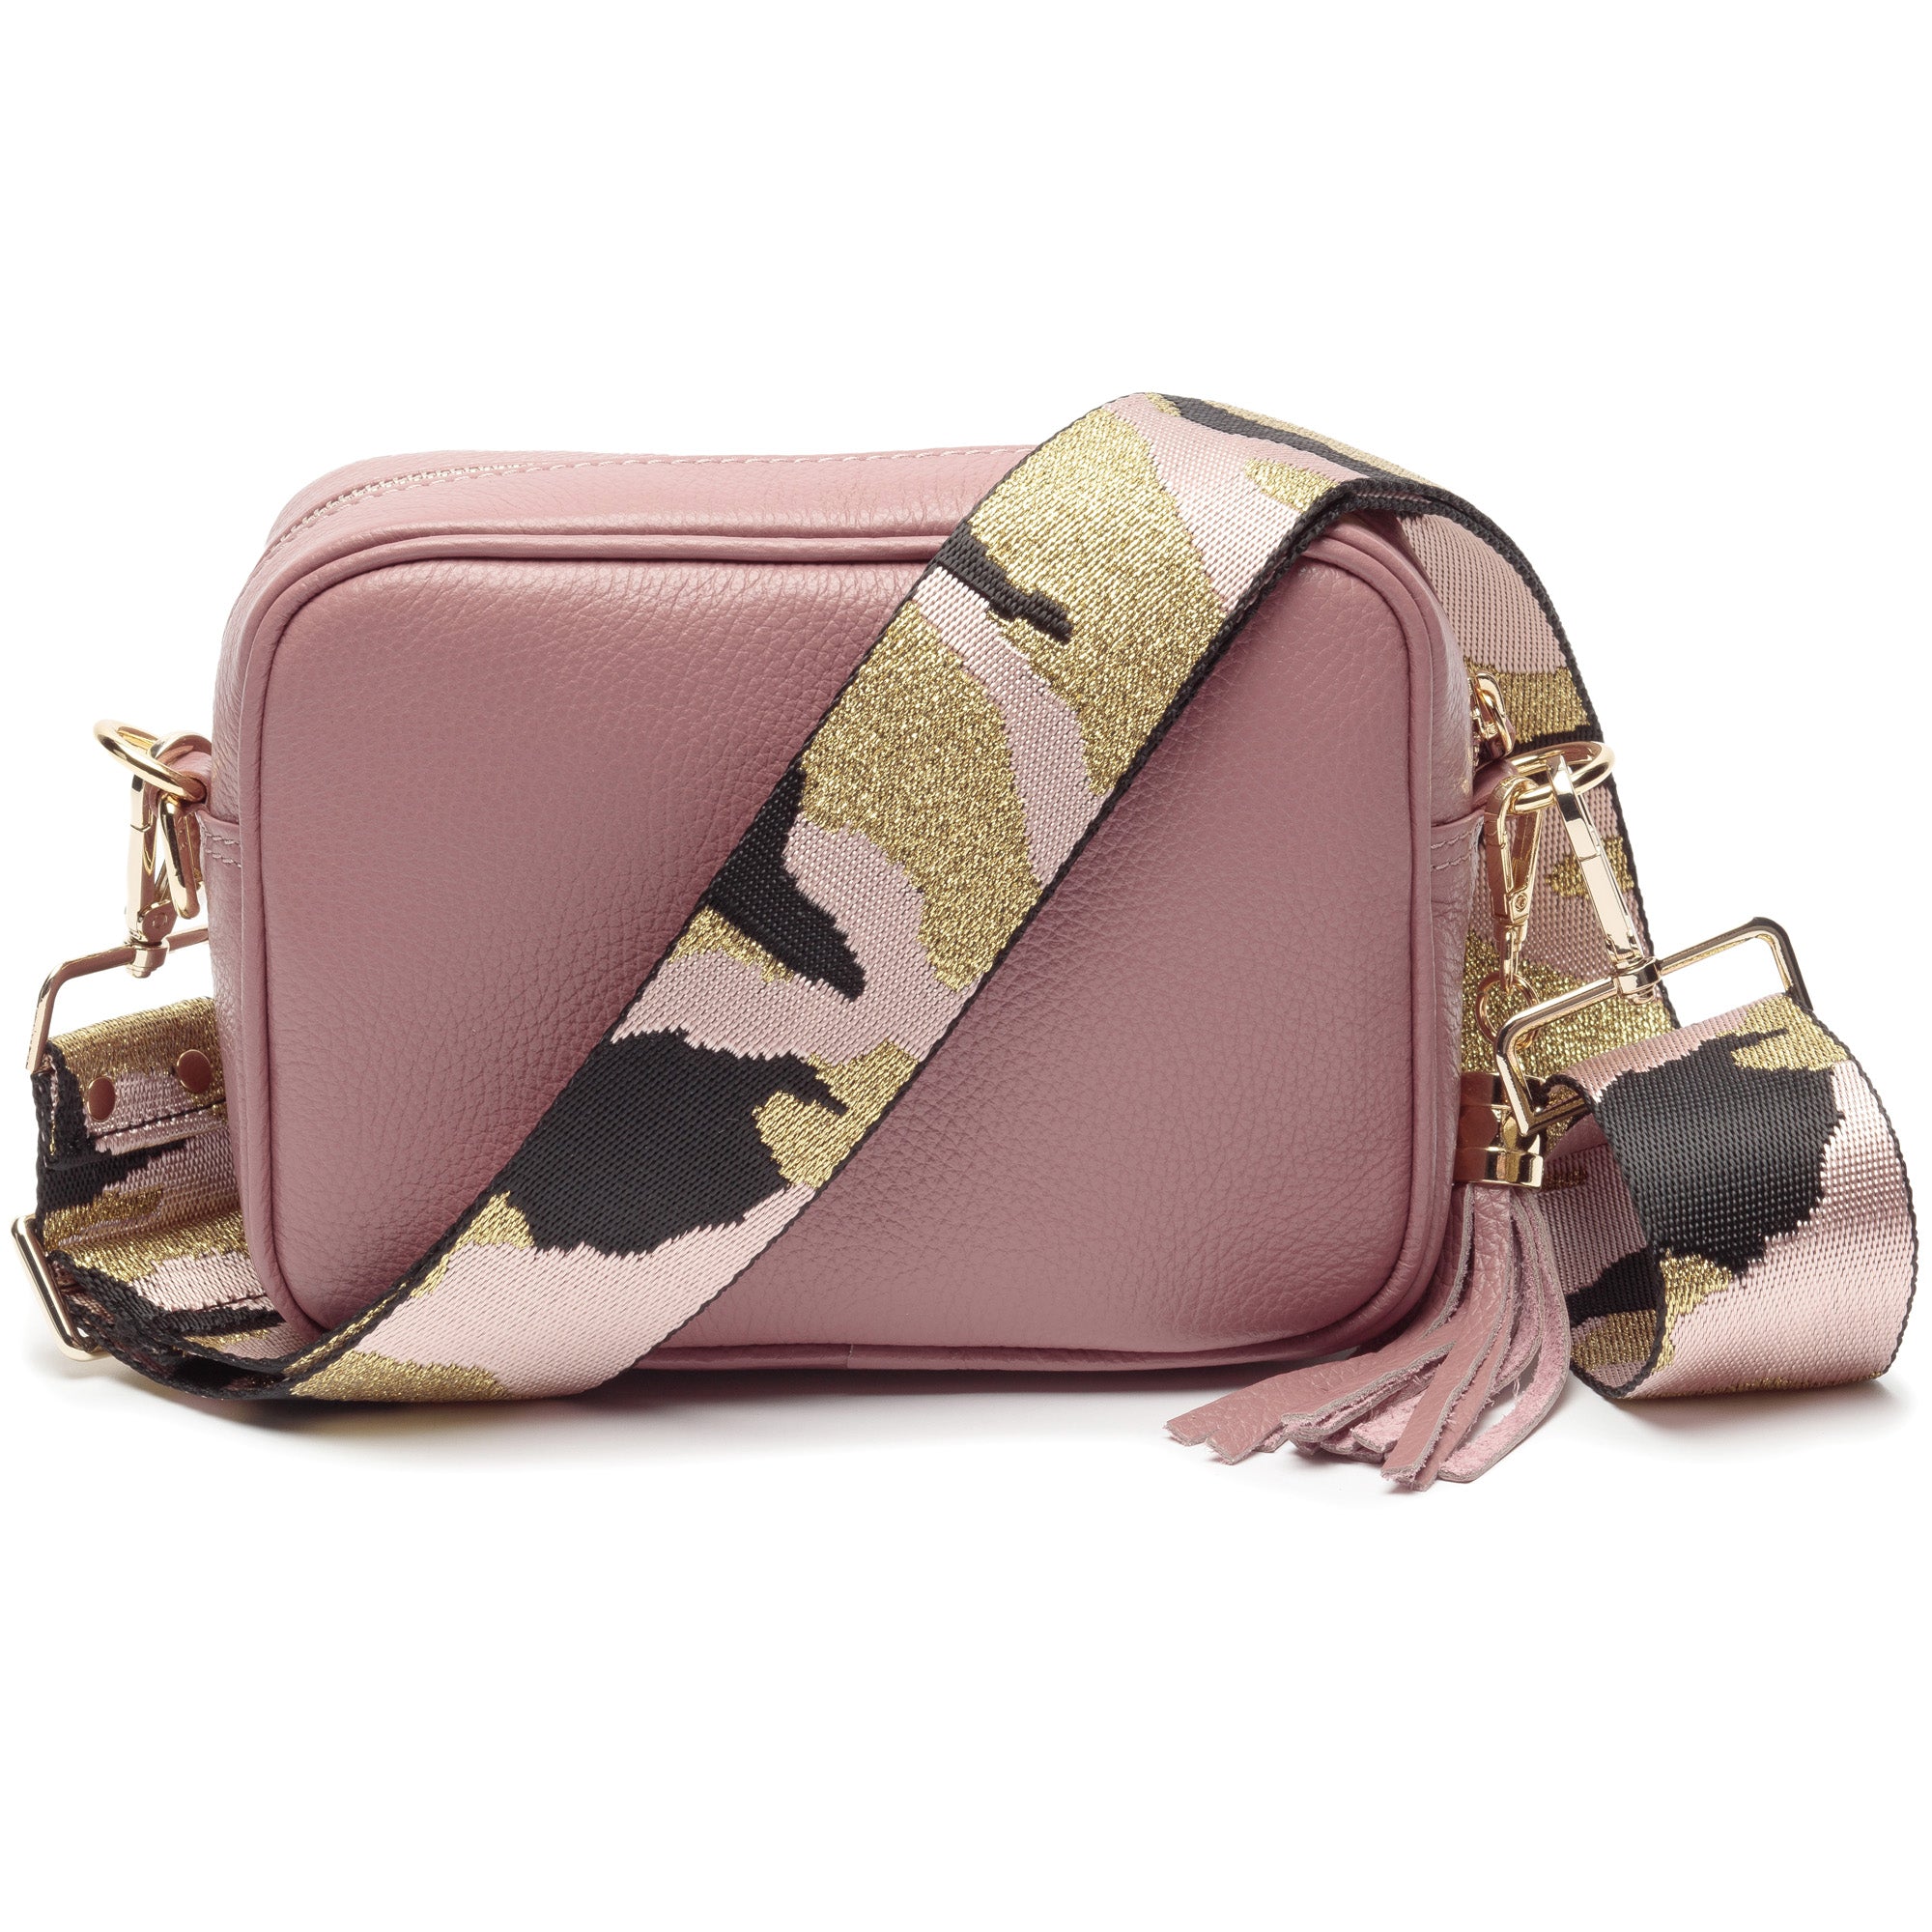 Crossbody Dusty Rose (Pink Camouflage strap)